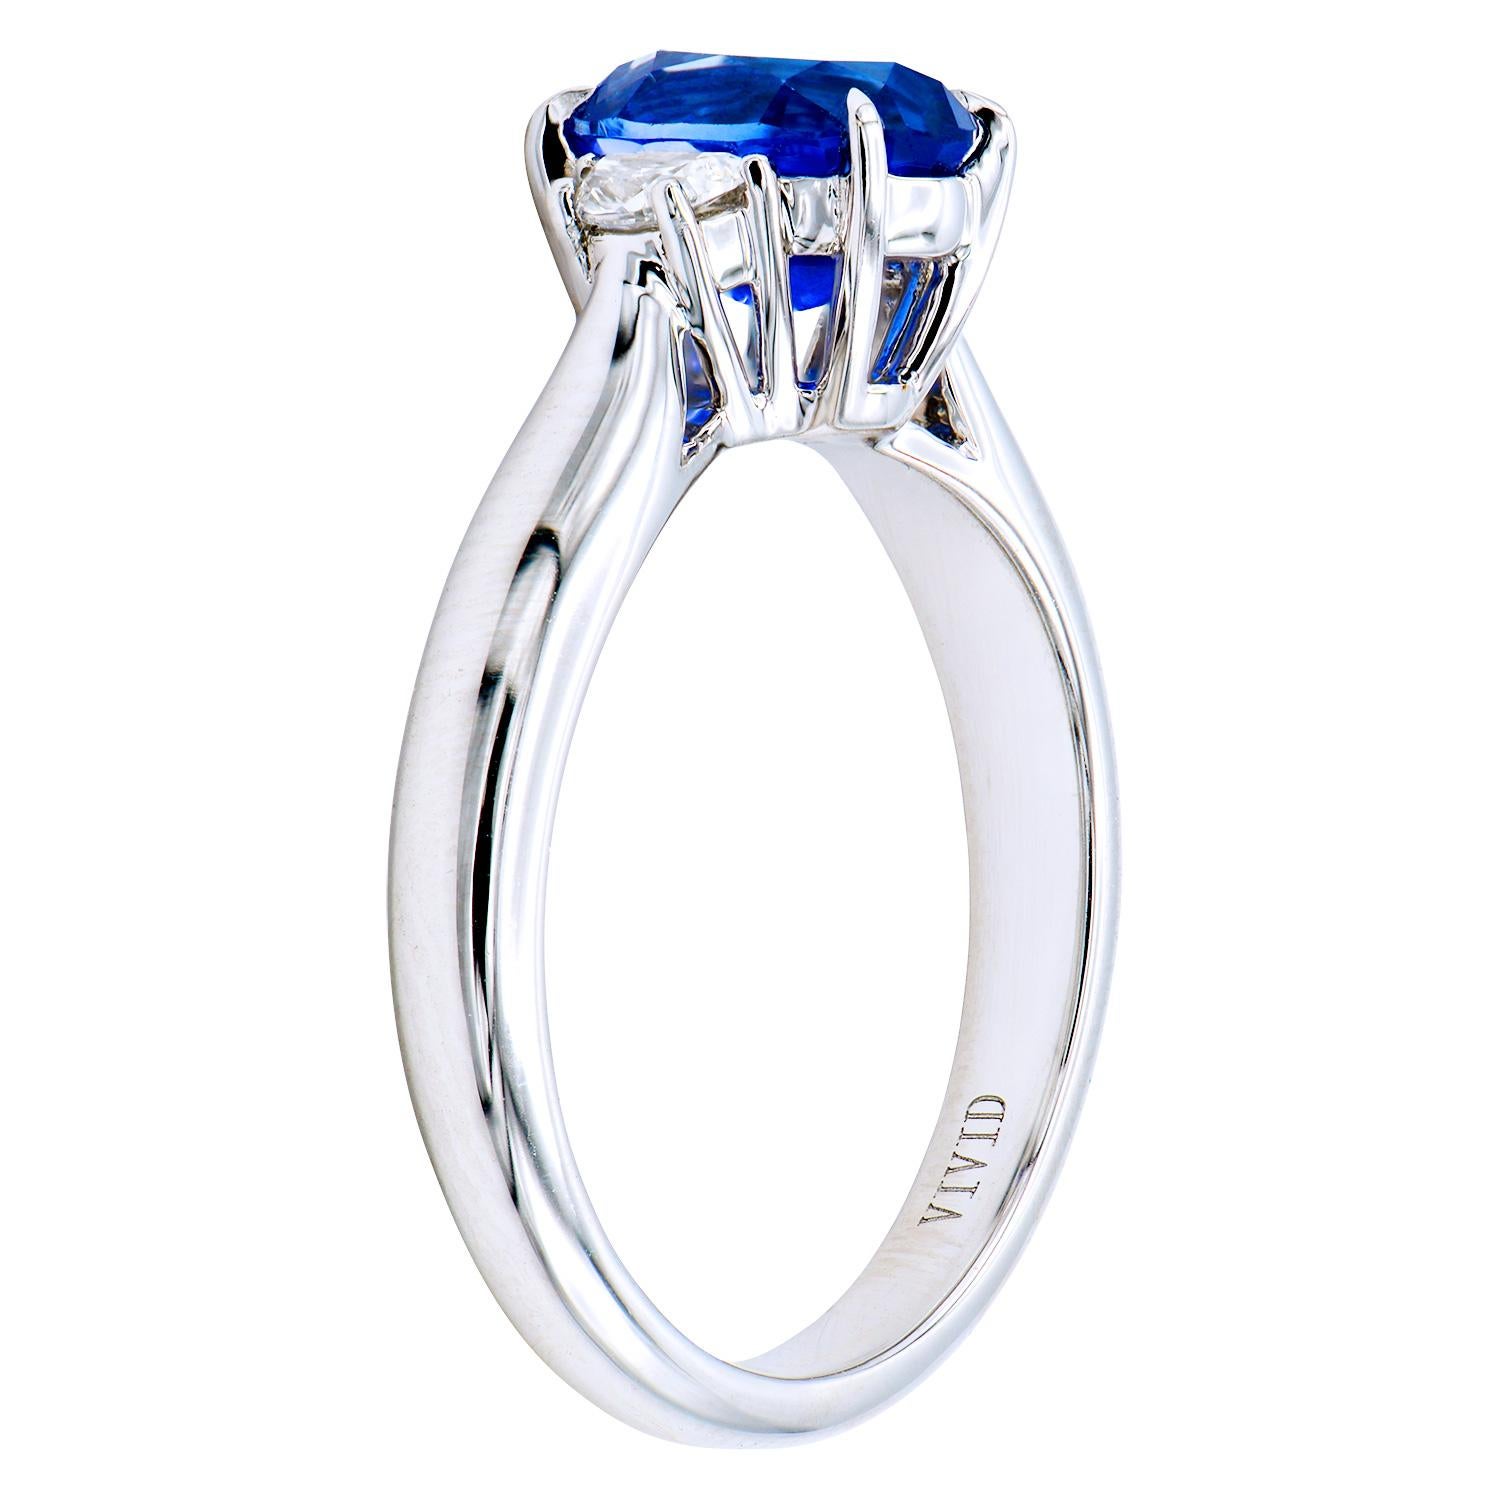 This beautiful 1.80 carat oval Ceylon Blue Sapphire is beautifully set in an 18 karat white gold ring made from 4.6 grams of white gold with 2 Half Moon cut side stones totaling 0.16 carats. This ring is size 6.5.   